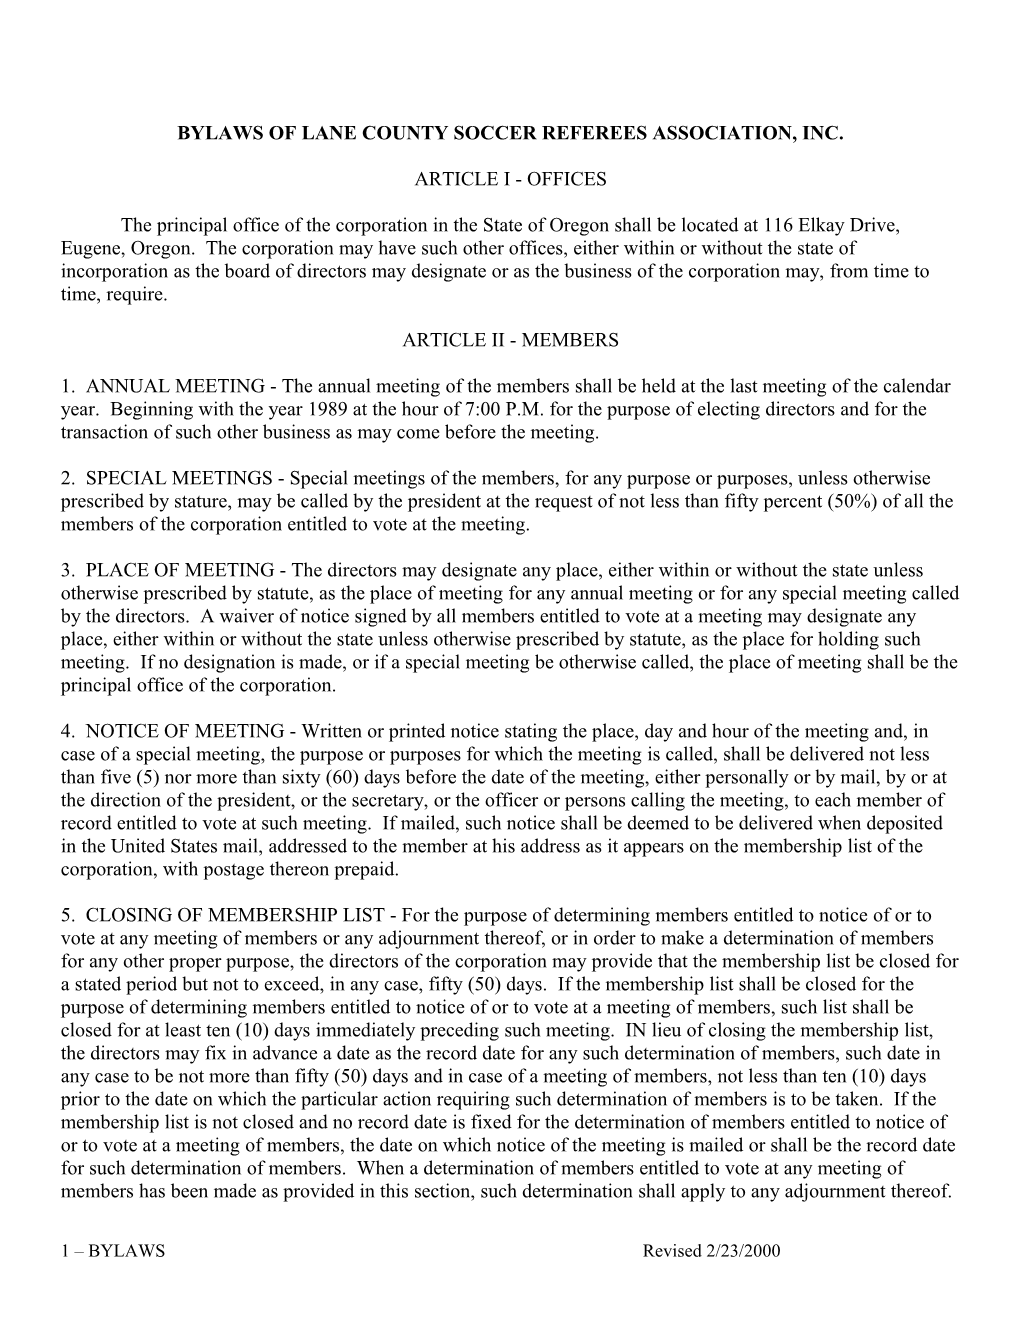 Bylaws of Lane County Soccer Referees Association, Inc